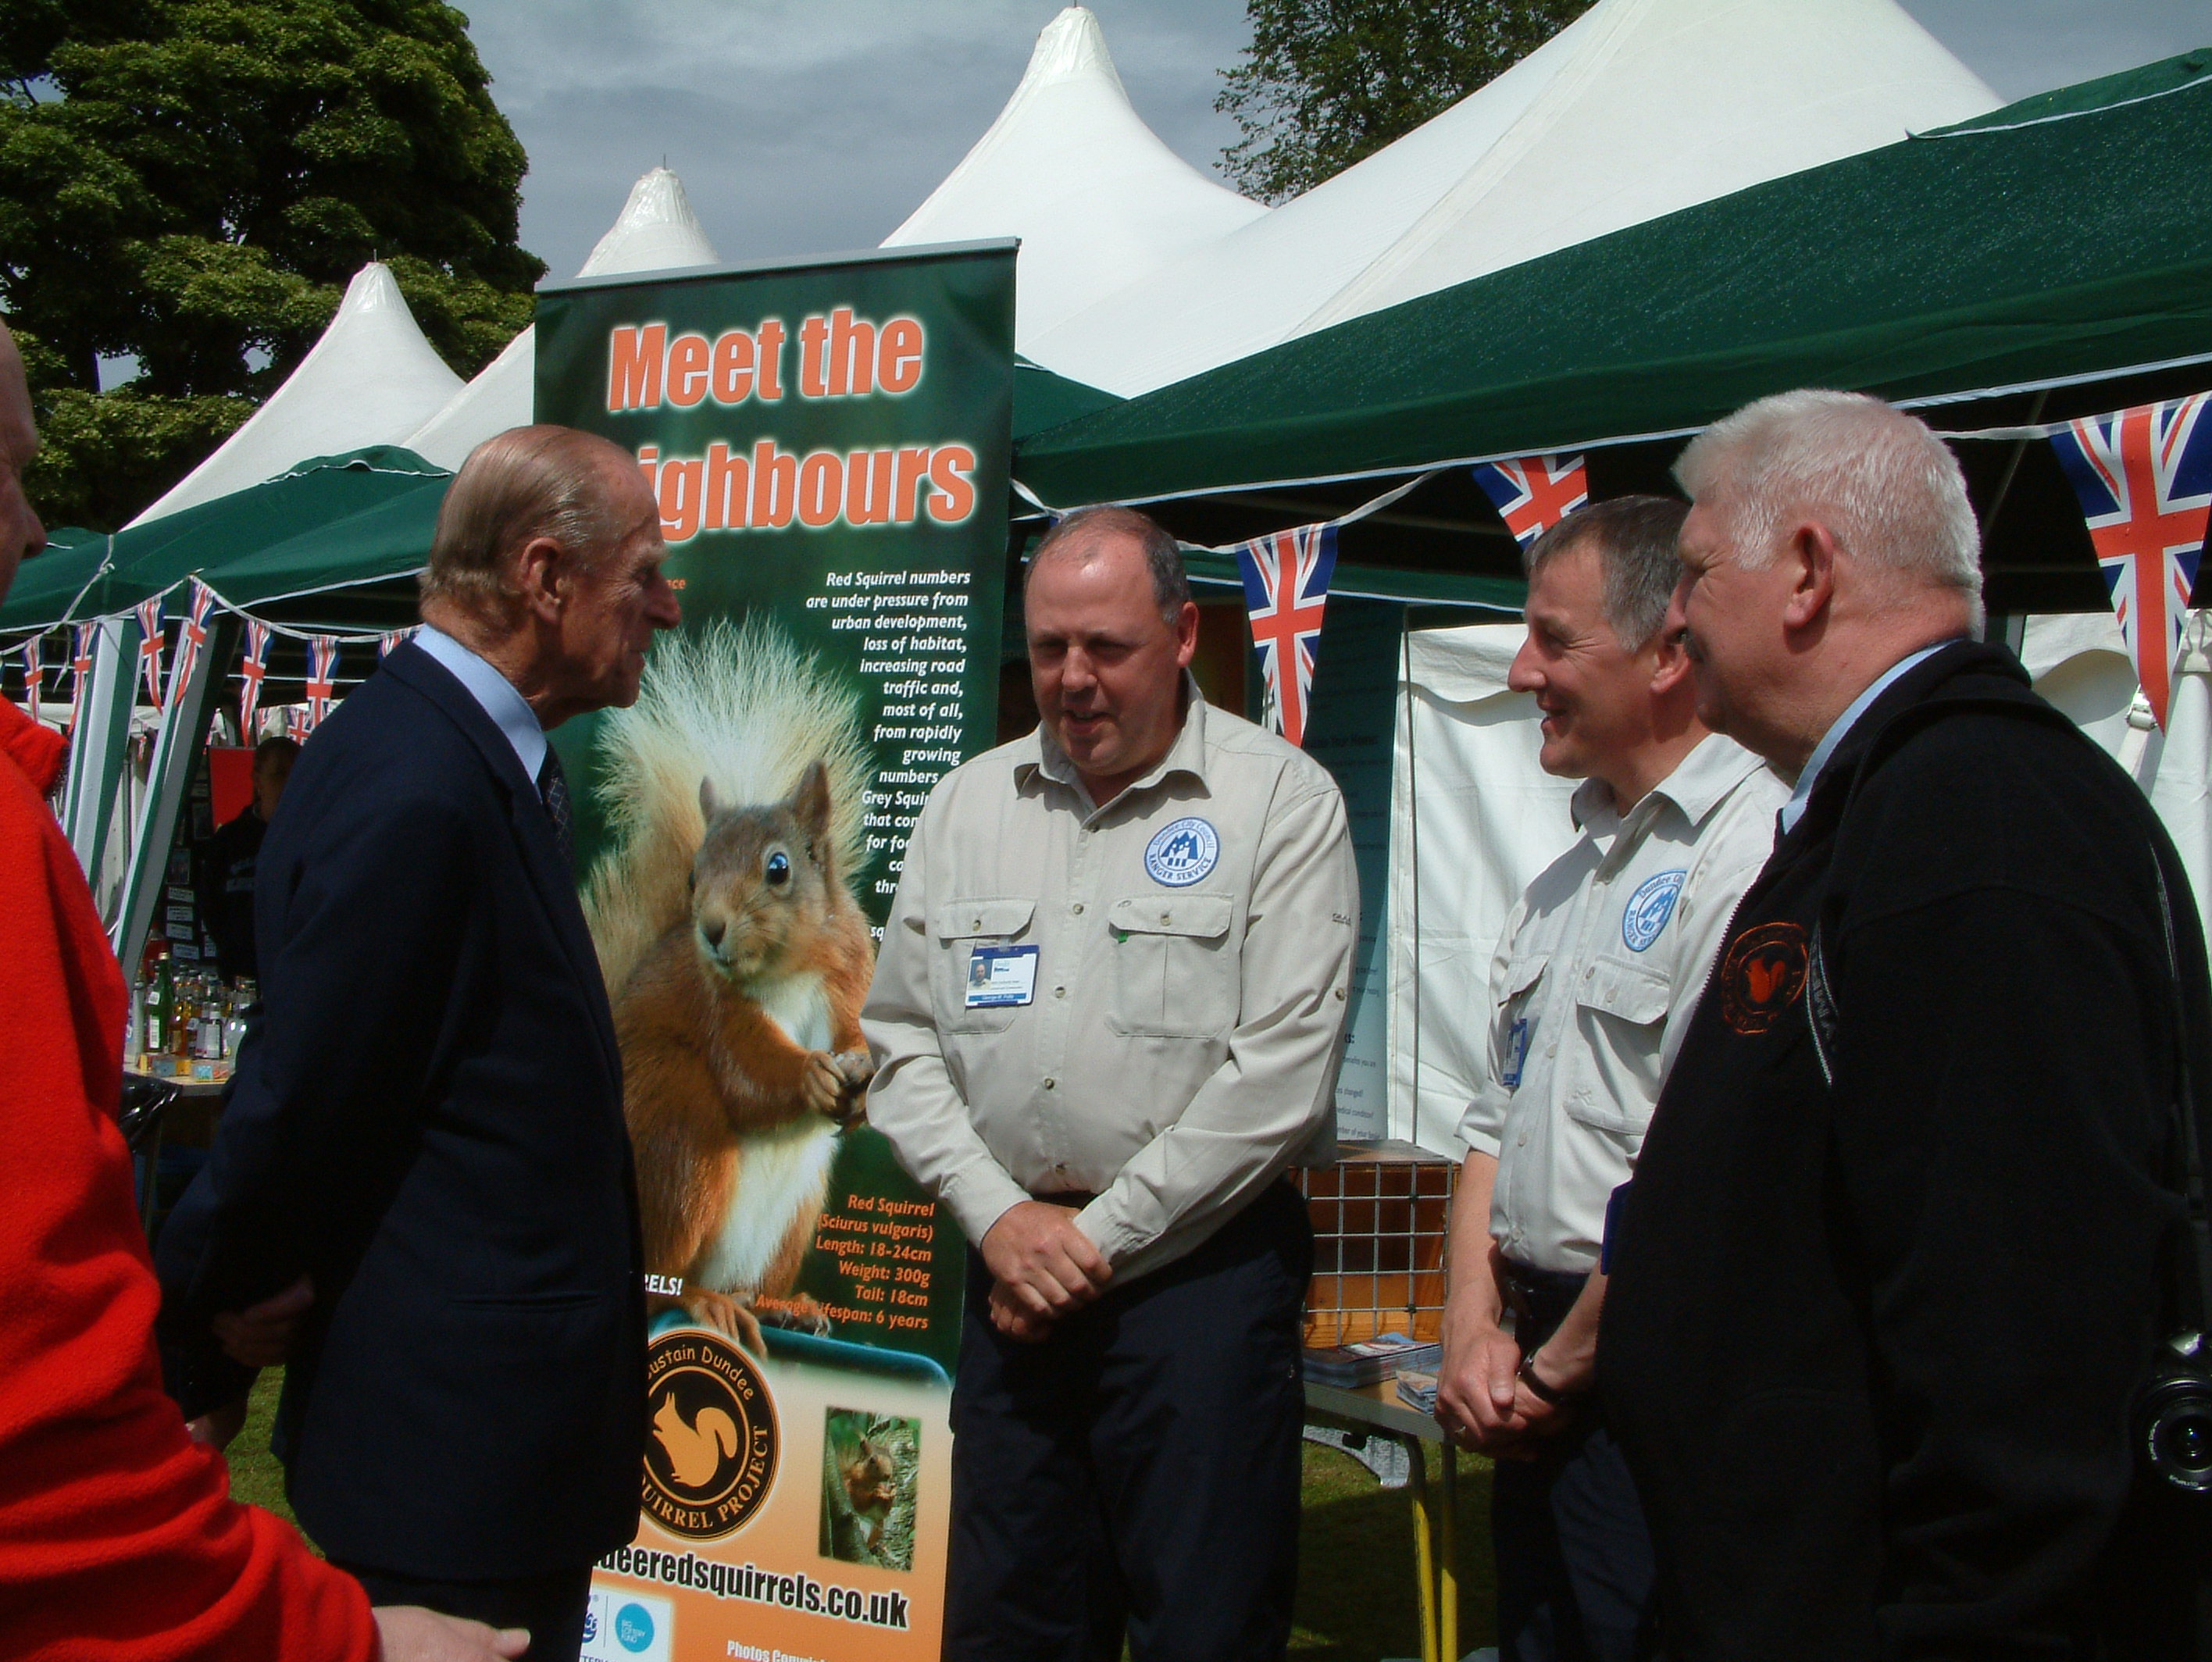 Prince Philip with Jimmie's four foot tall squirrel